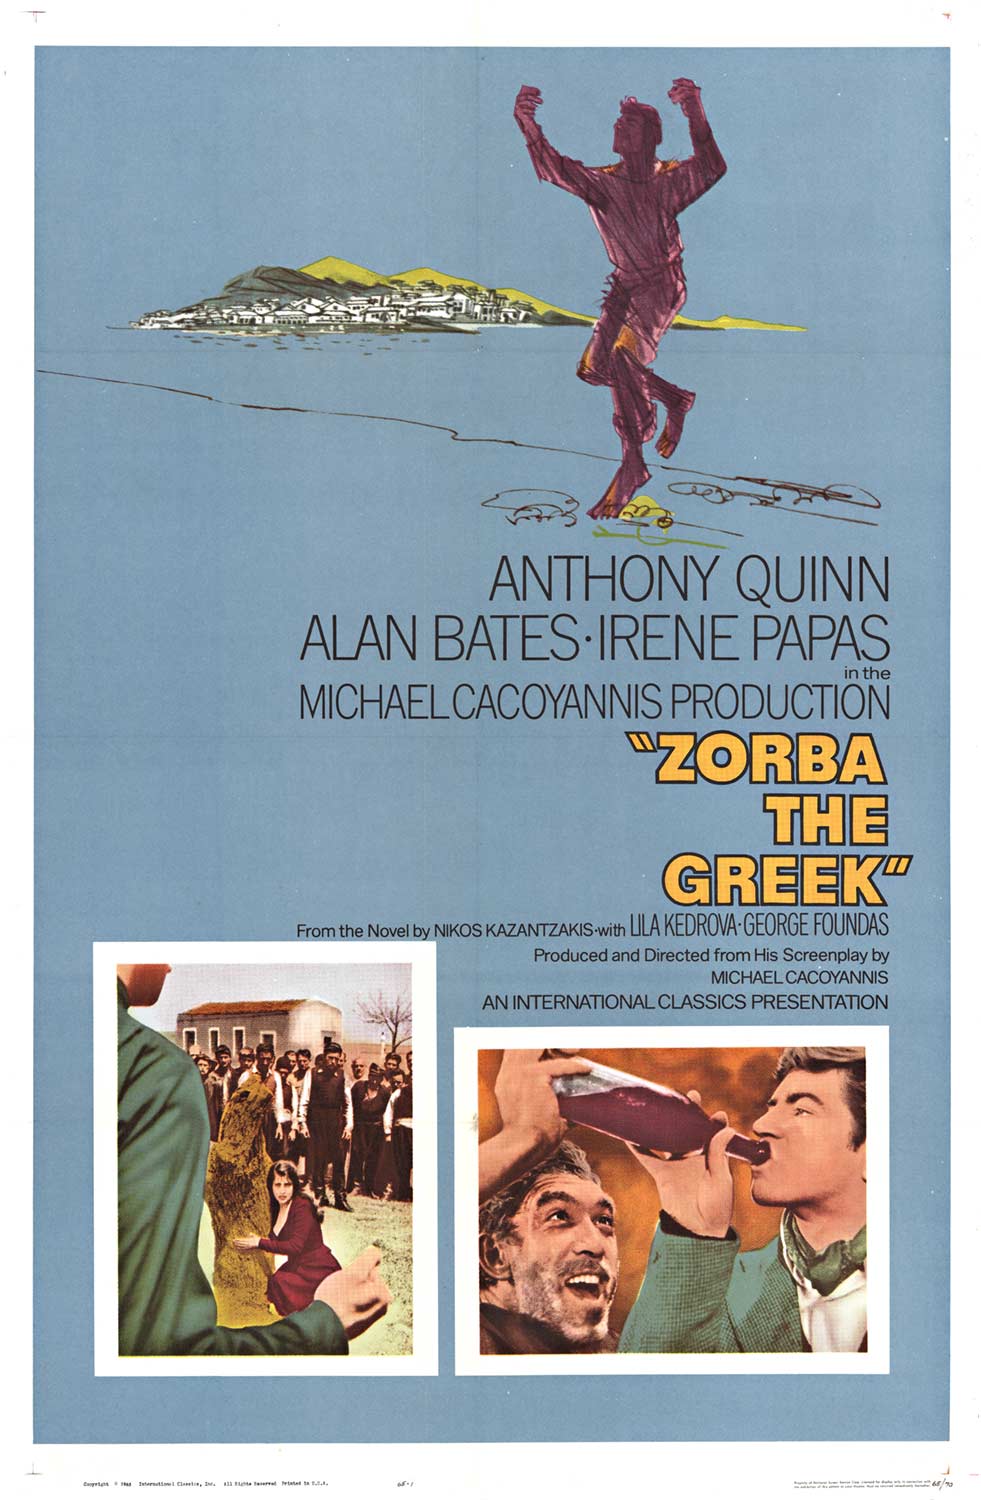 Anthony Quinn, Alan Bates, and Irene Paps star in “Zorba the Greek’